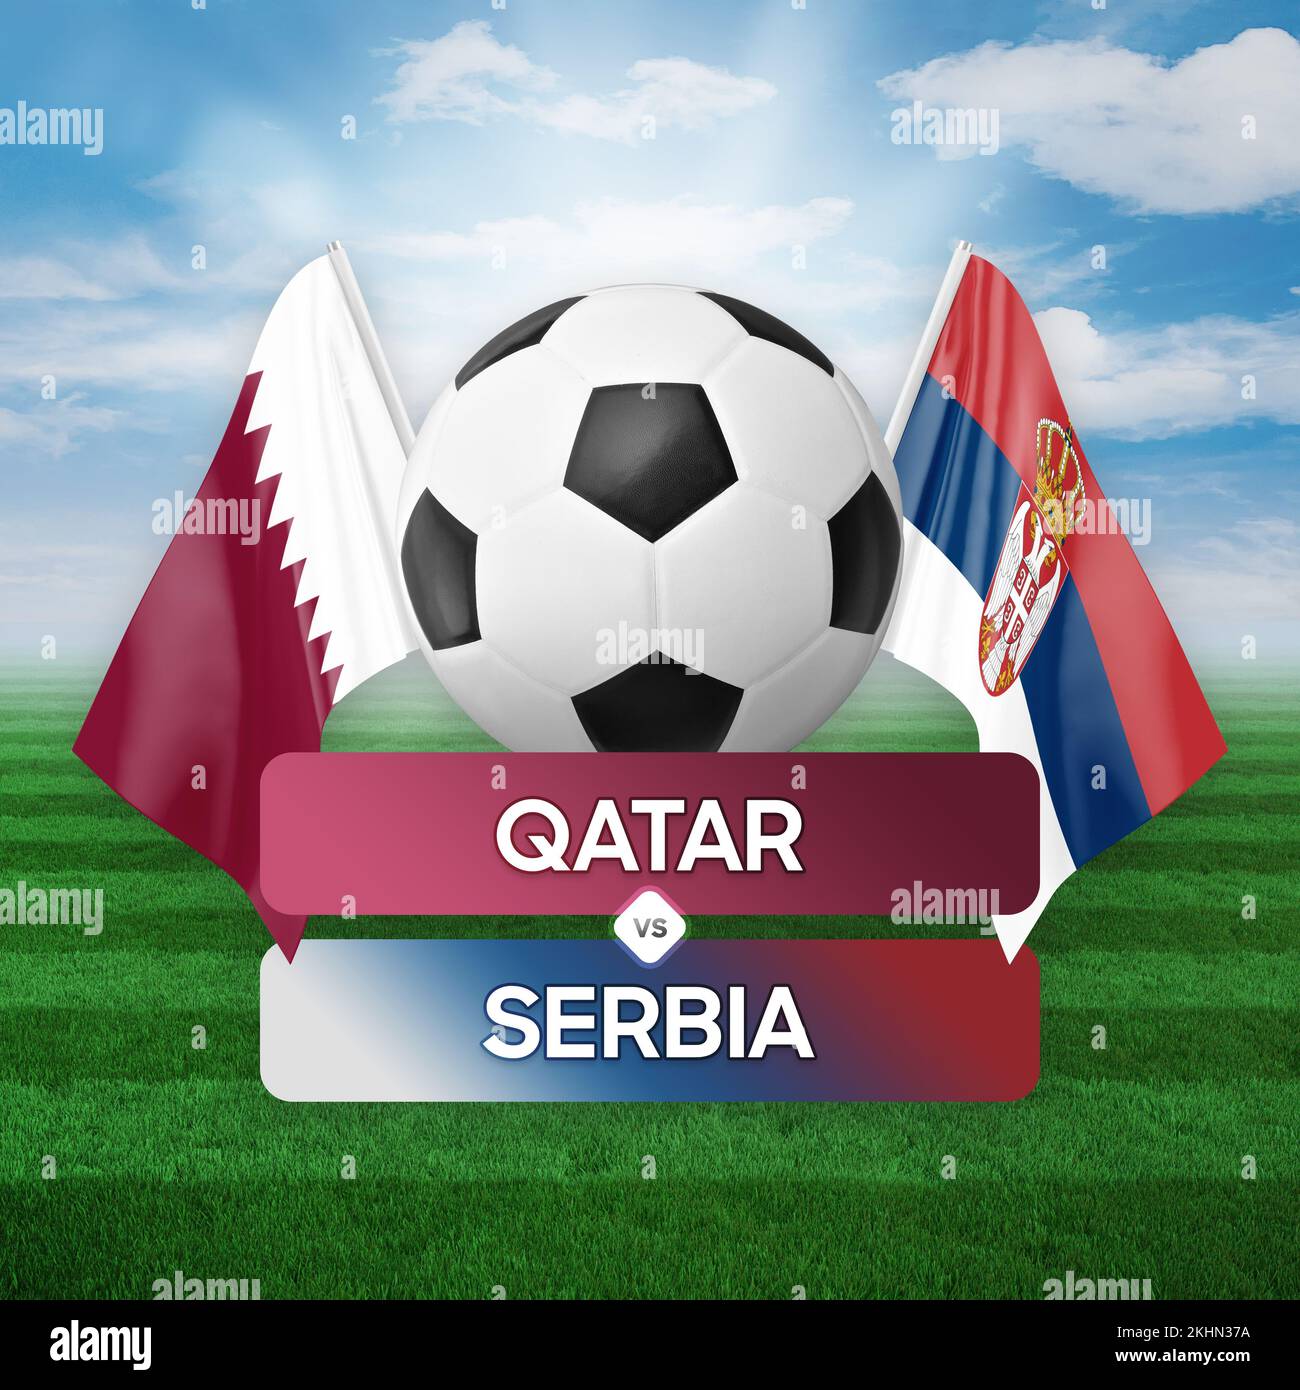 Qatar vs Serbia national teams soccer football match competition concept. Stock Photo